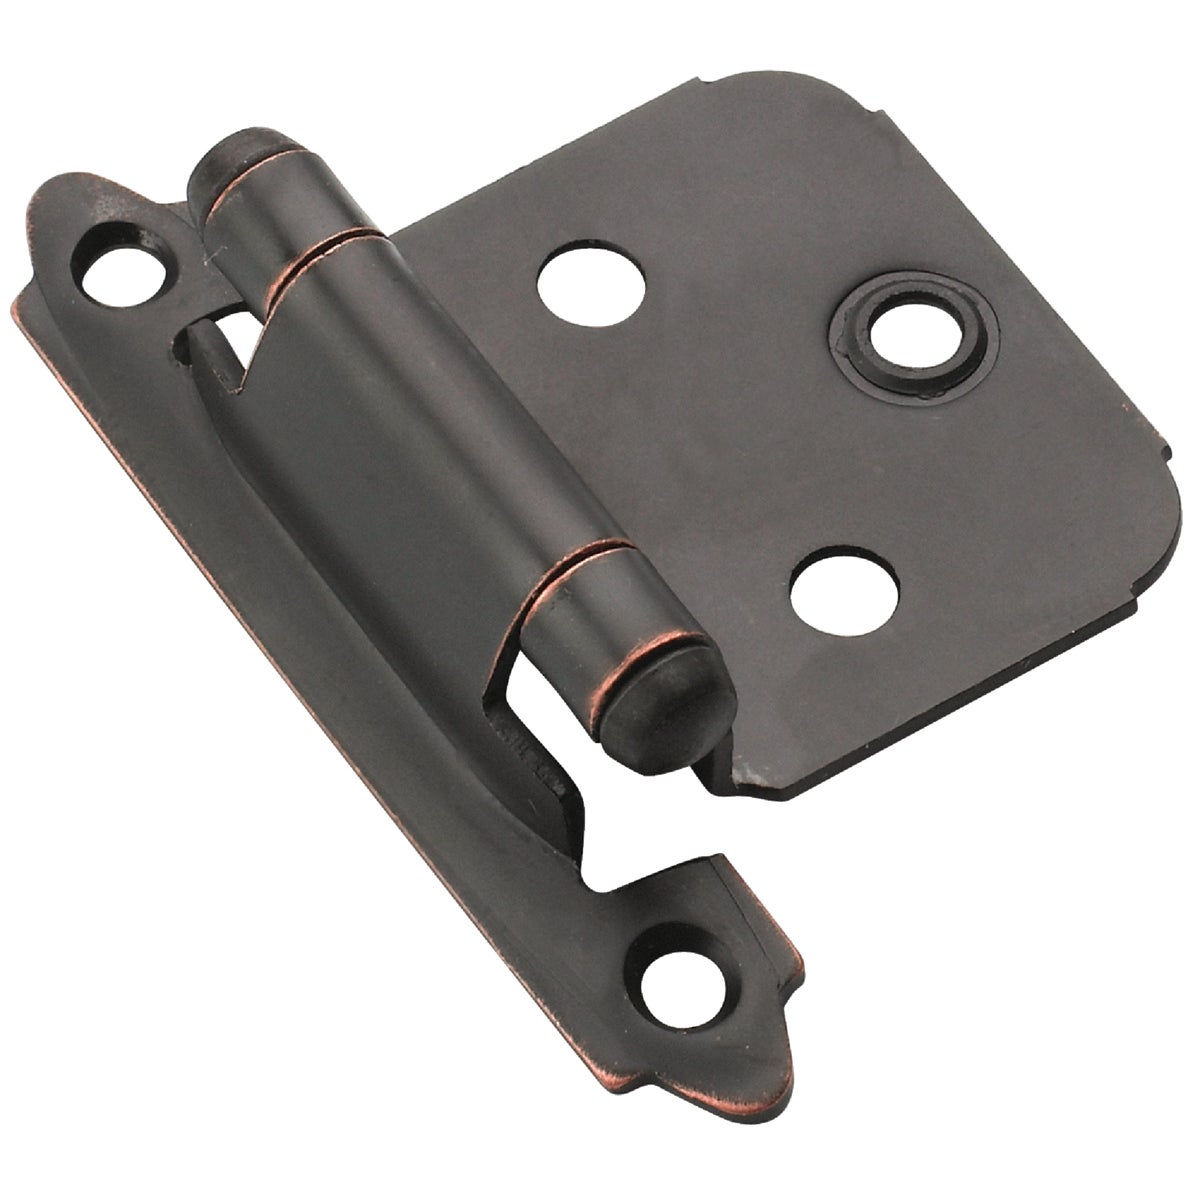 Amerock Oil Rubbed Bronze Self-Closing Face Mount Overlay Hinge (2-Pack)